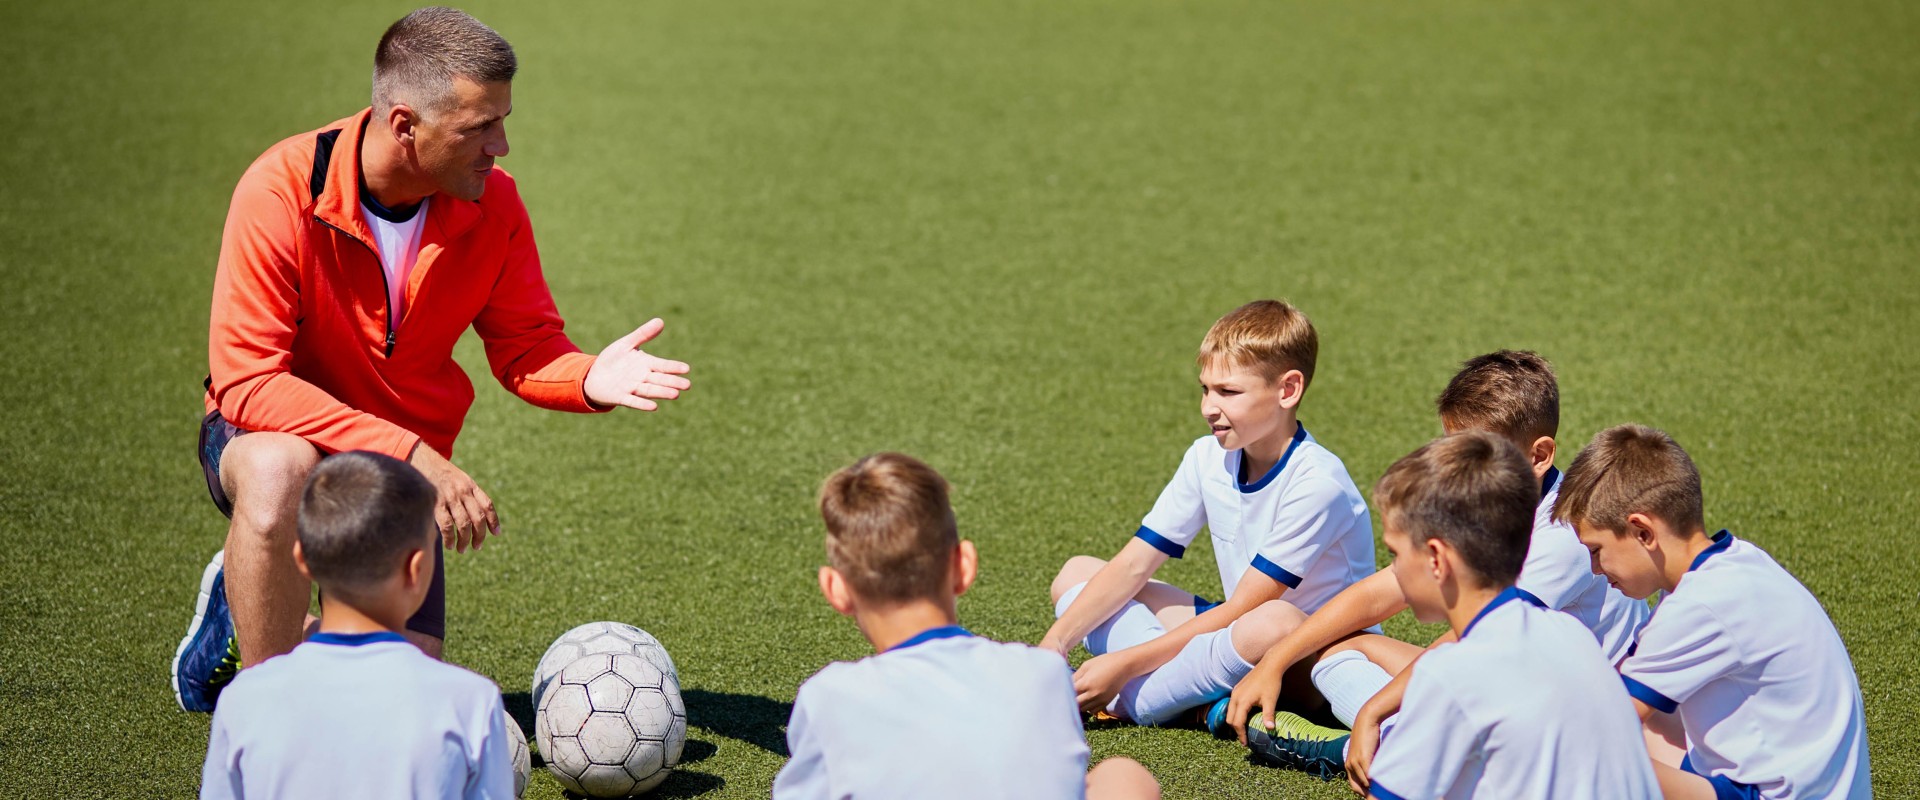 4 Essential Responsibilities of a Coach: What You Need to Know